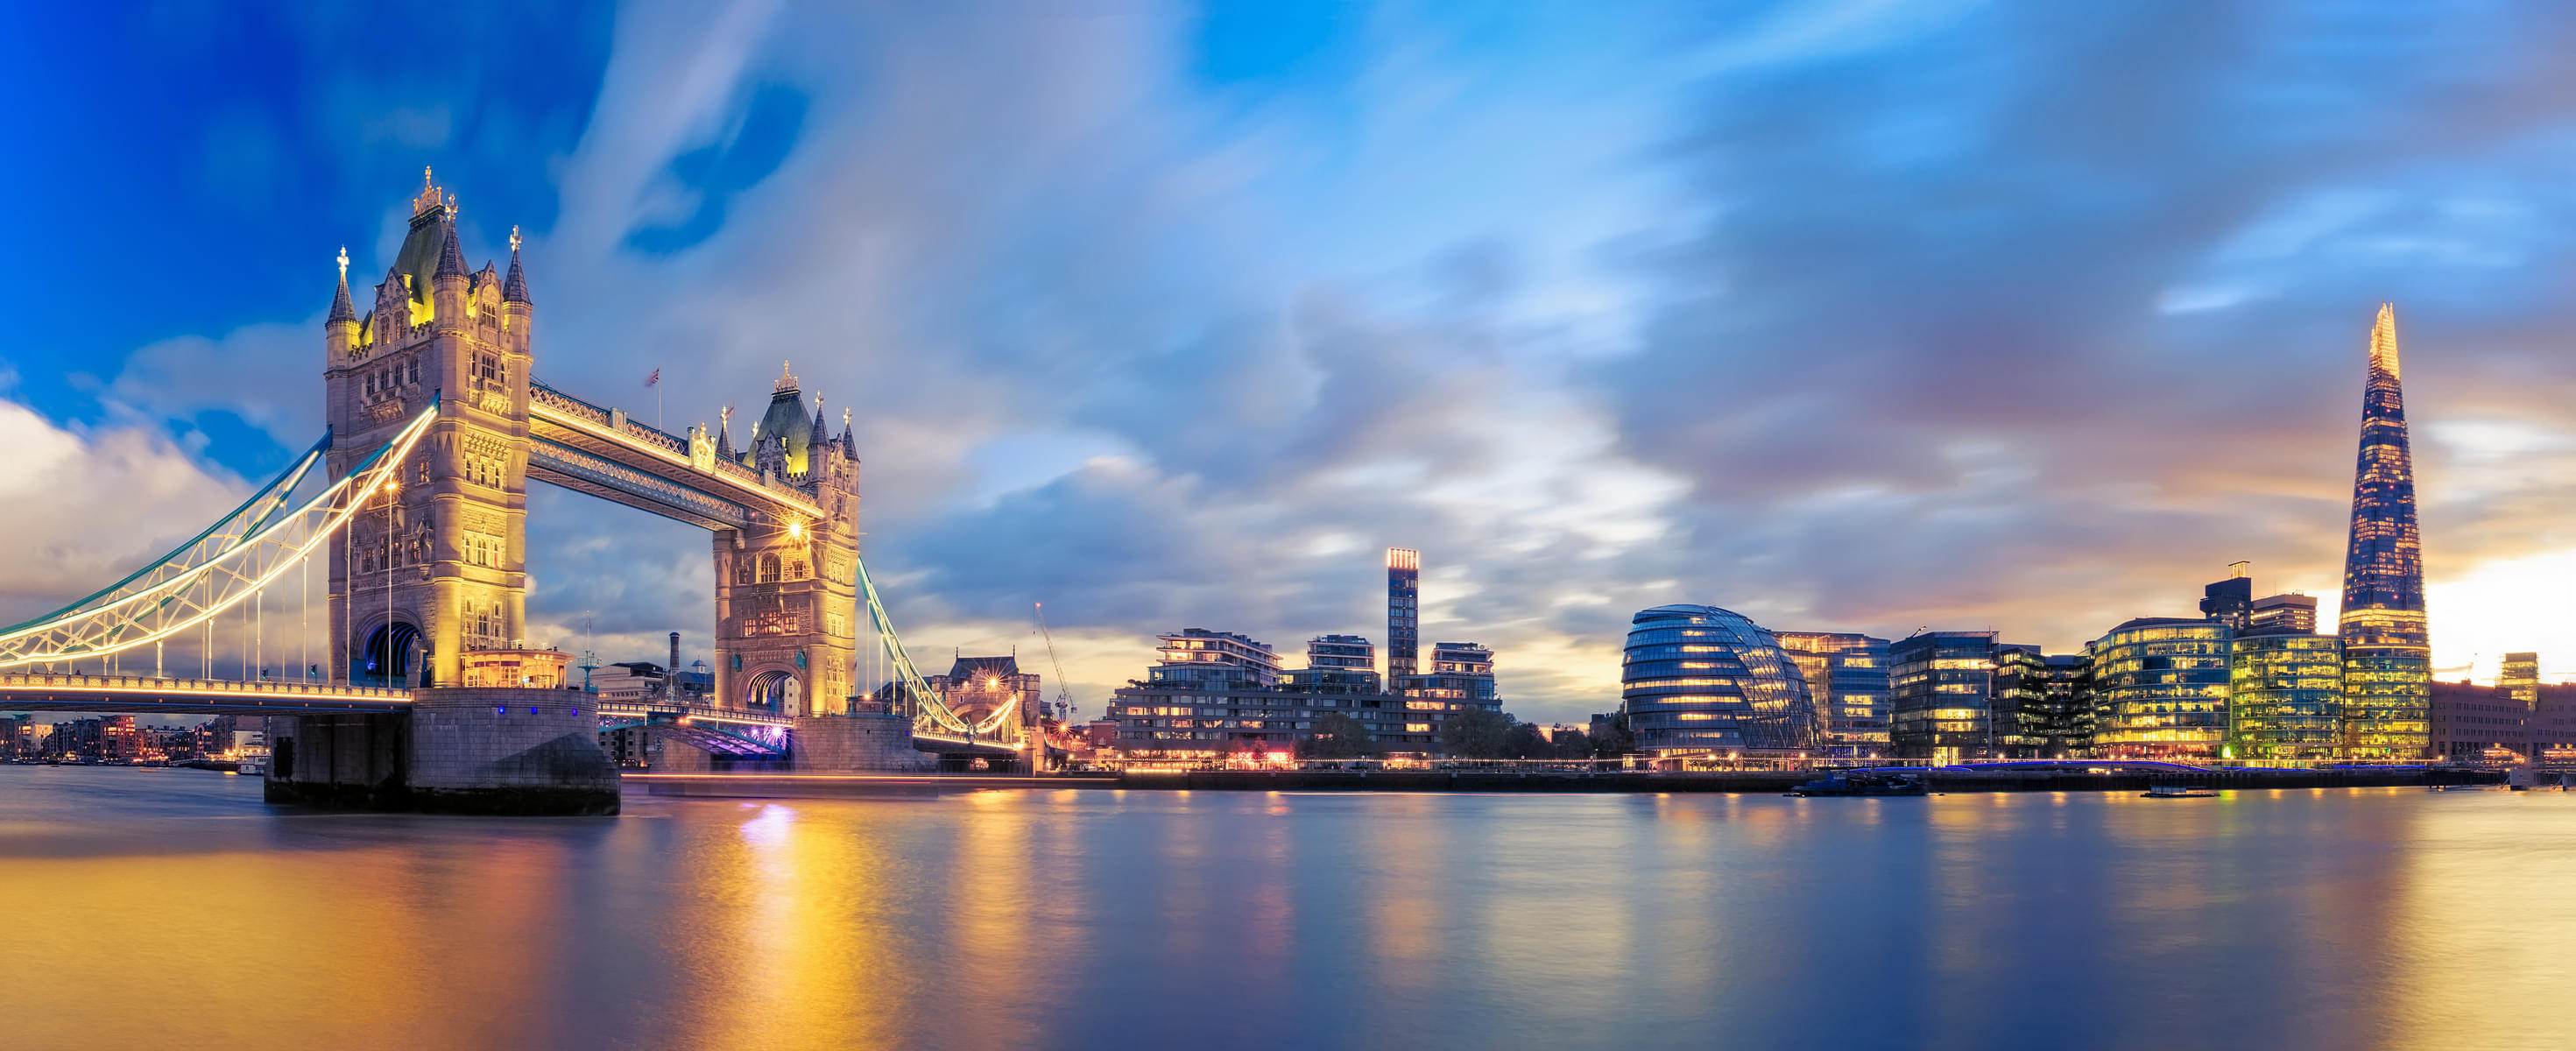 Witness prominent landmarks of London on this tour